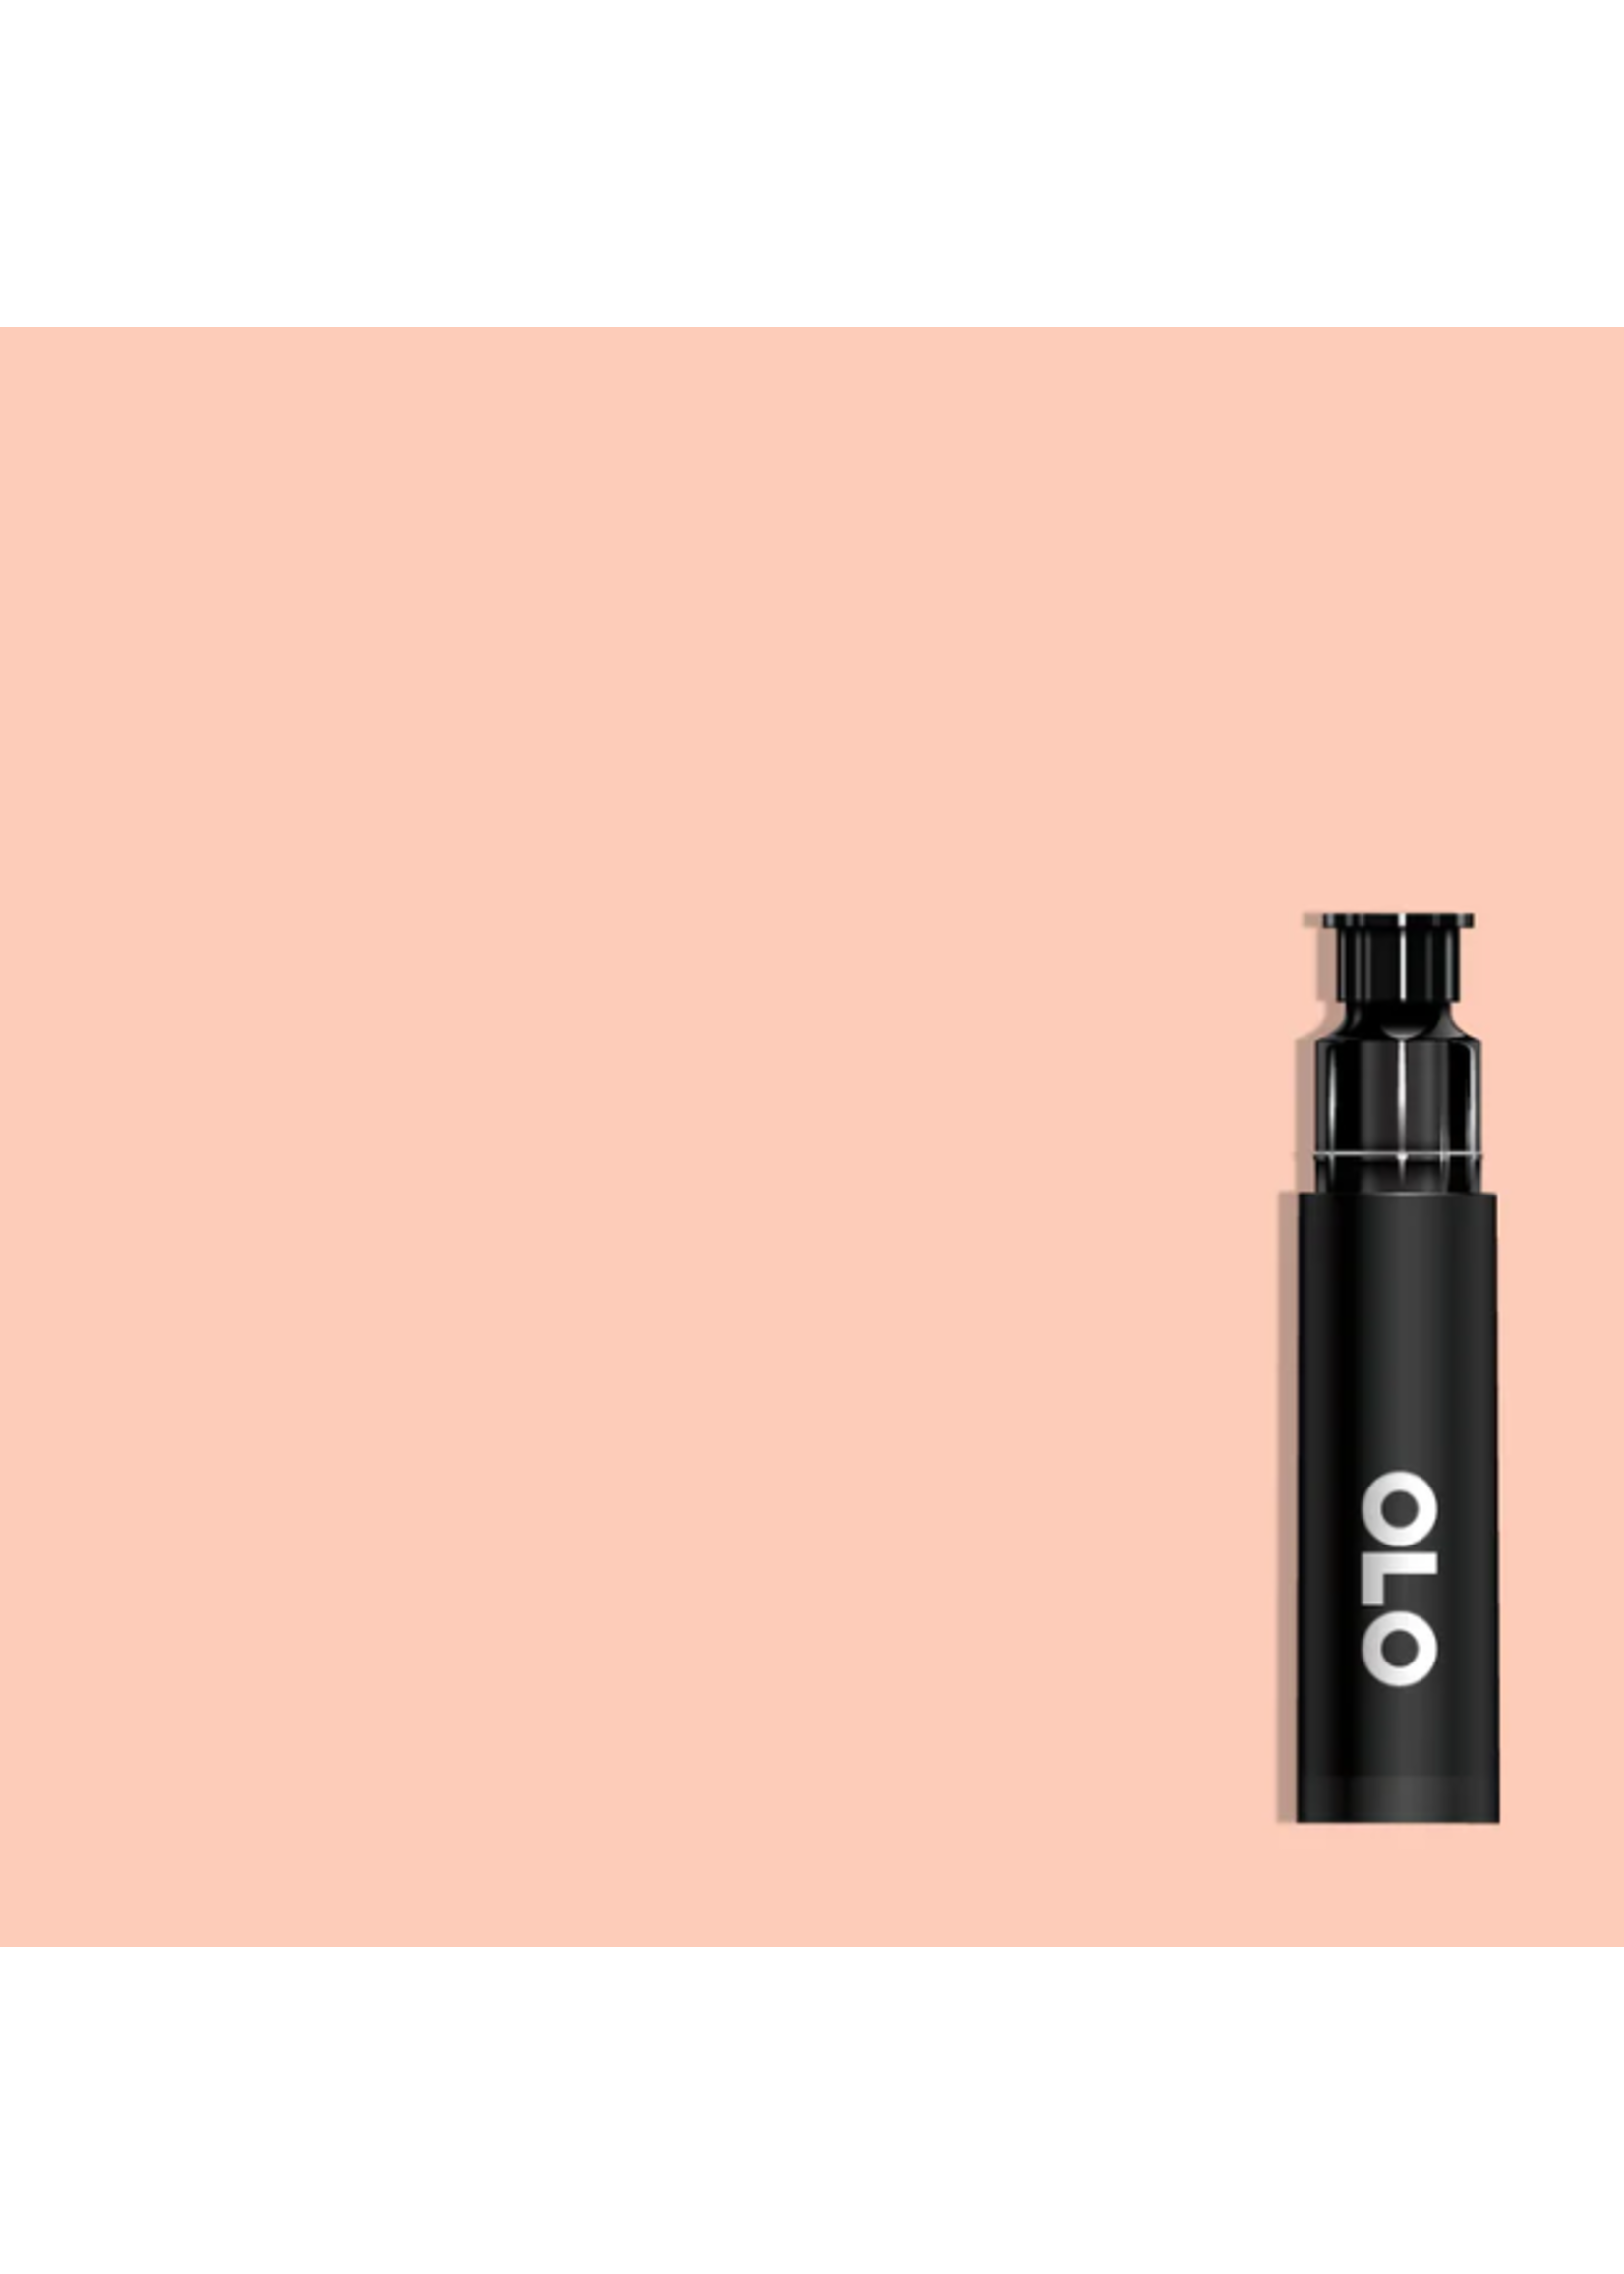 OLO OLO Brush Replacement Cartridge: Clam